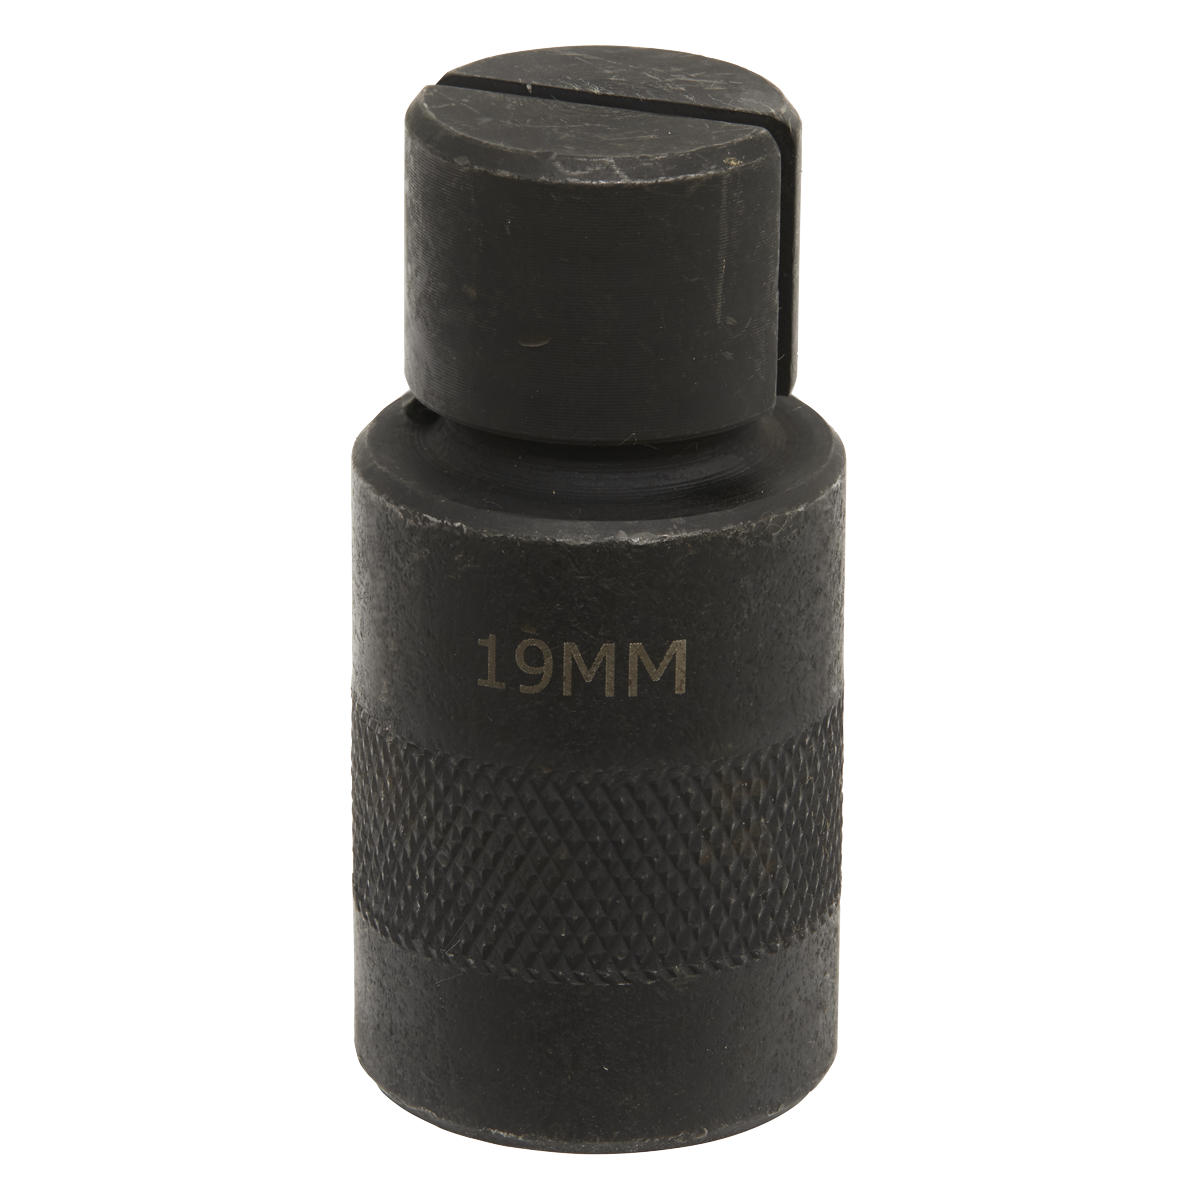 Replacement Collet for MS062 Ø15mm